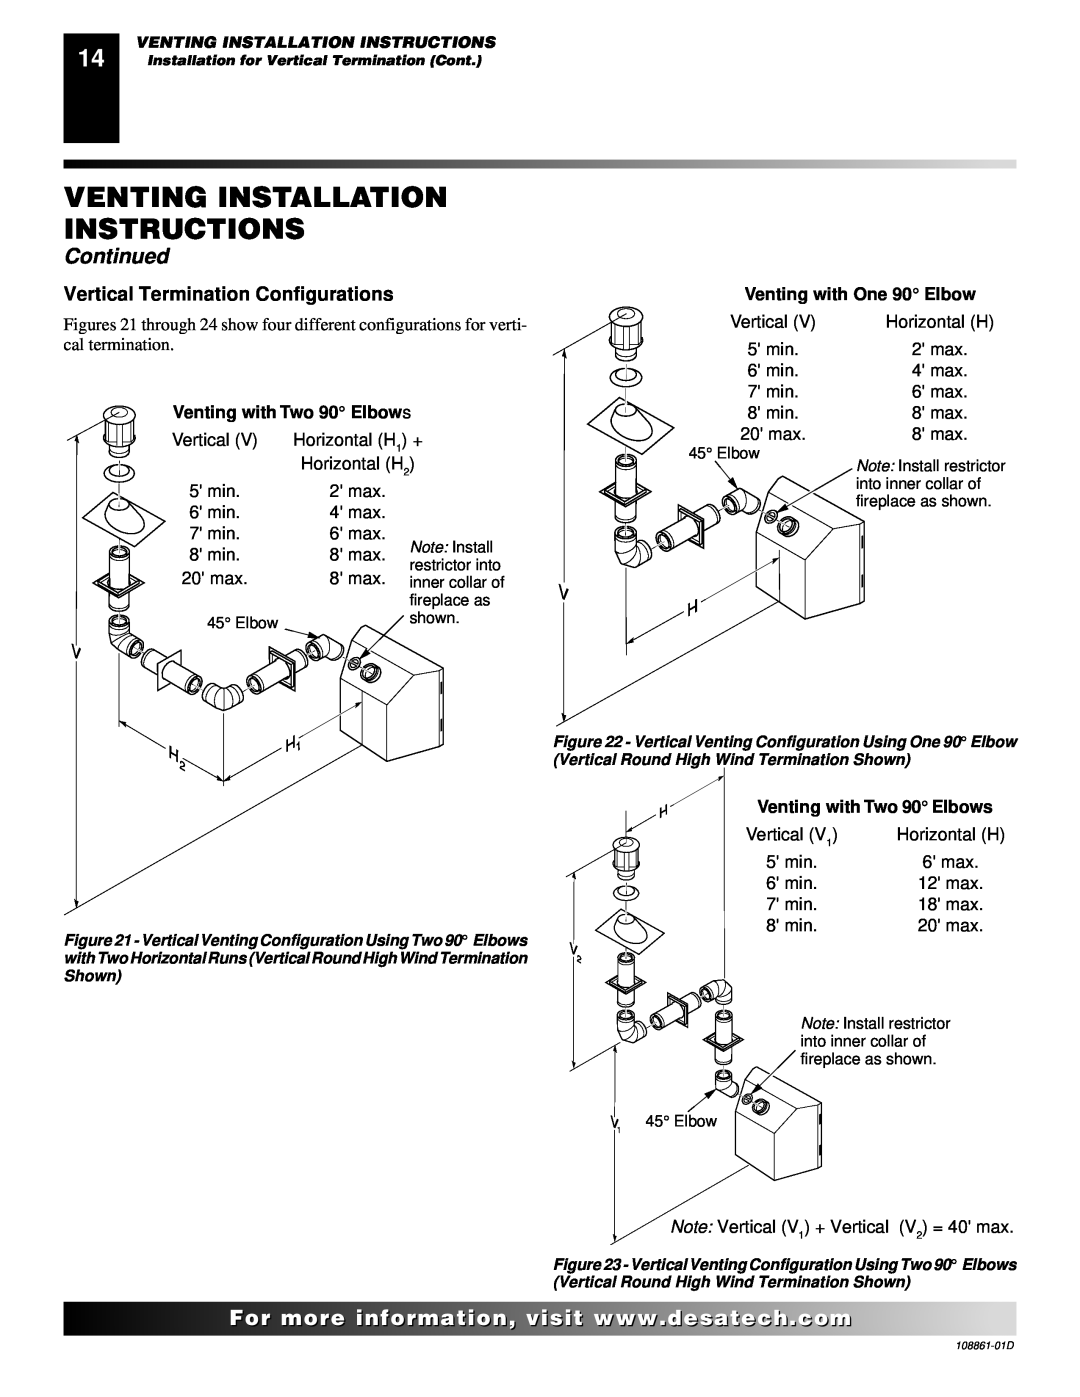 Desa CHDV42NR Vertical Termination Configurations, Venting Installation Instructions, Continued, Venting with One 90 Elbow 